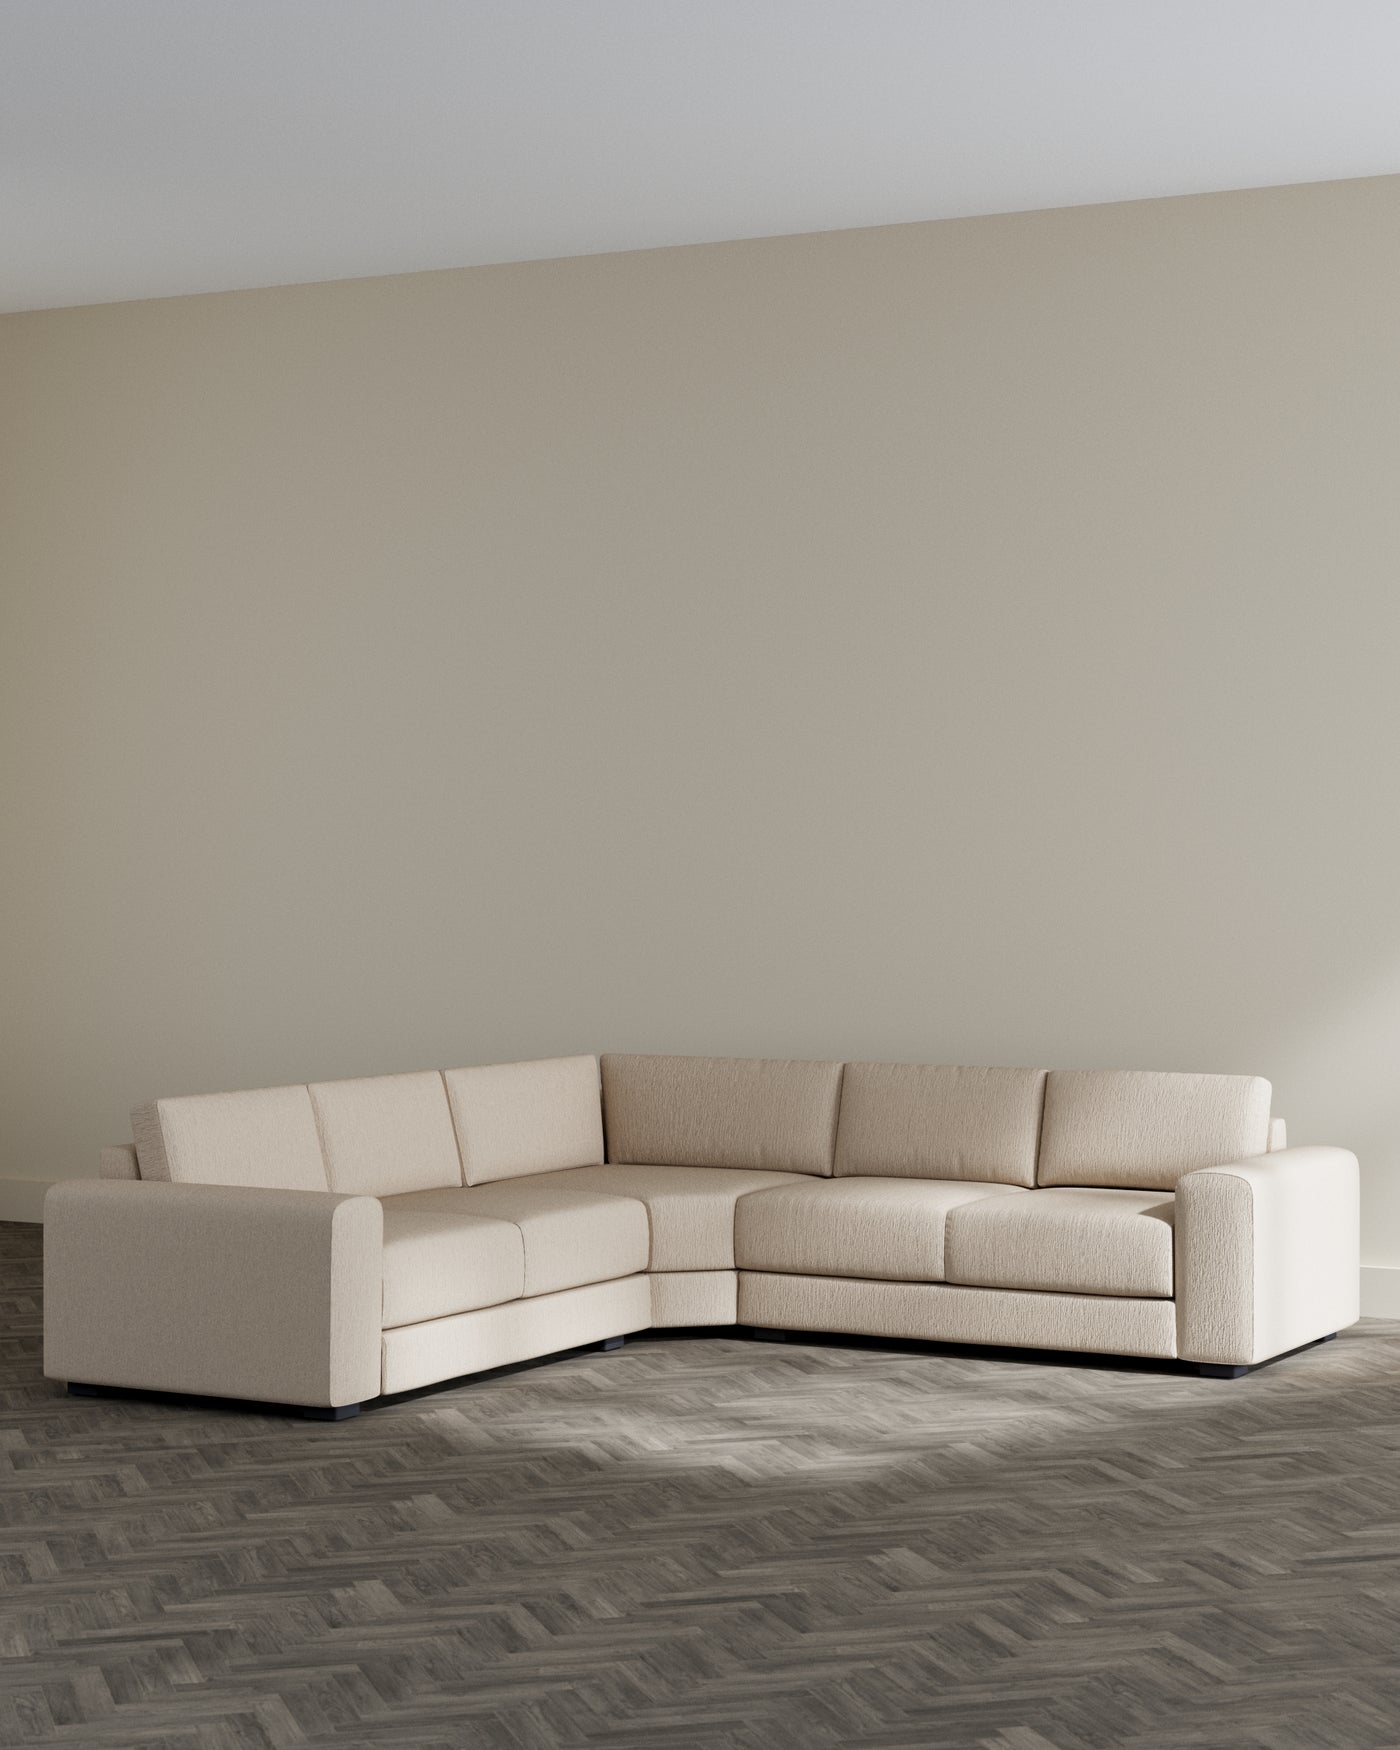 Modern beige L-shaped sectional sofa with a chaise on the left side, featuring clean lines and plush cushioning, presented in a room with light grey walls and dark herringbone wooden flooring.